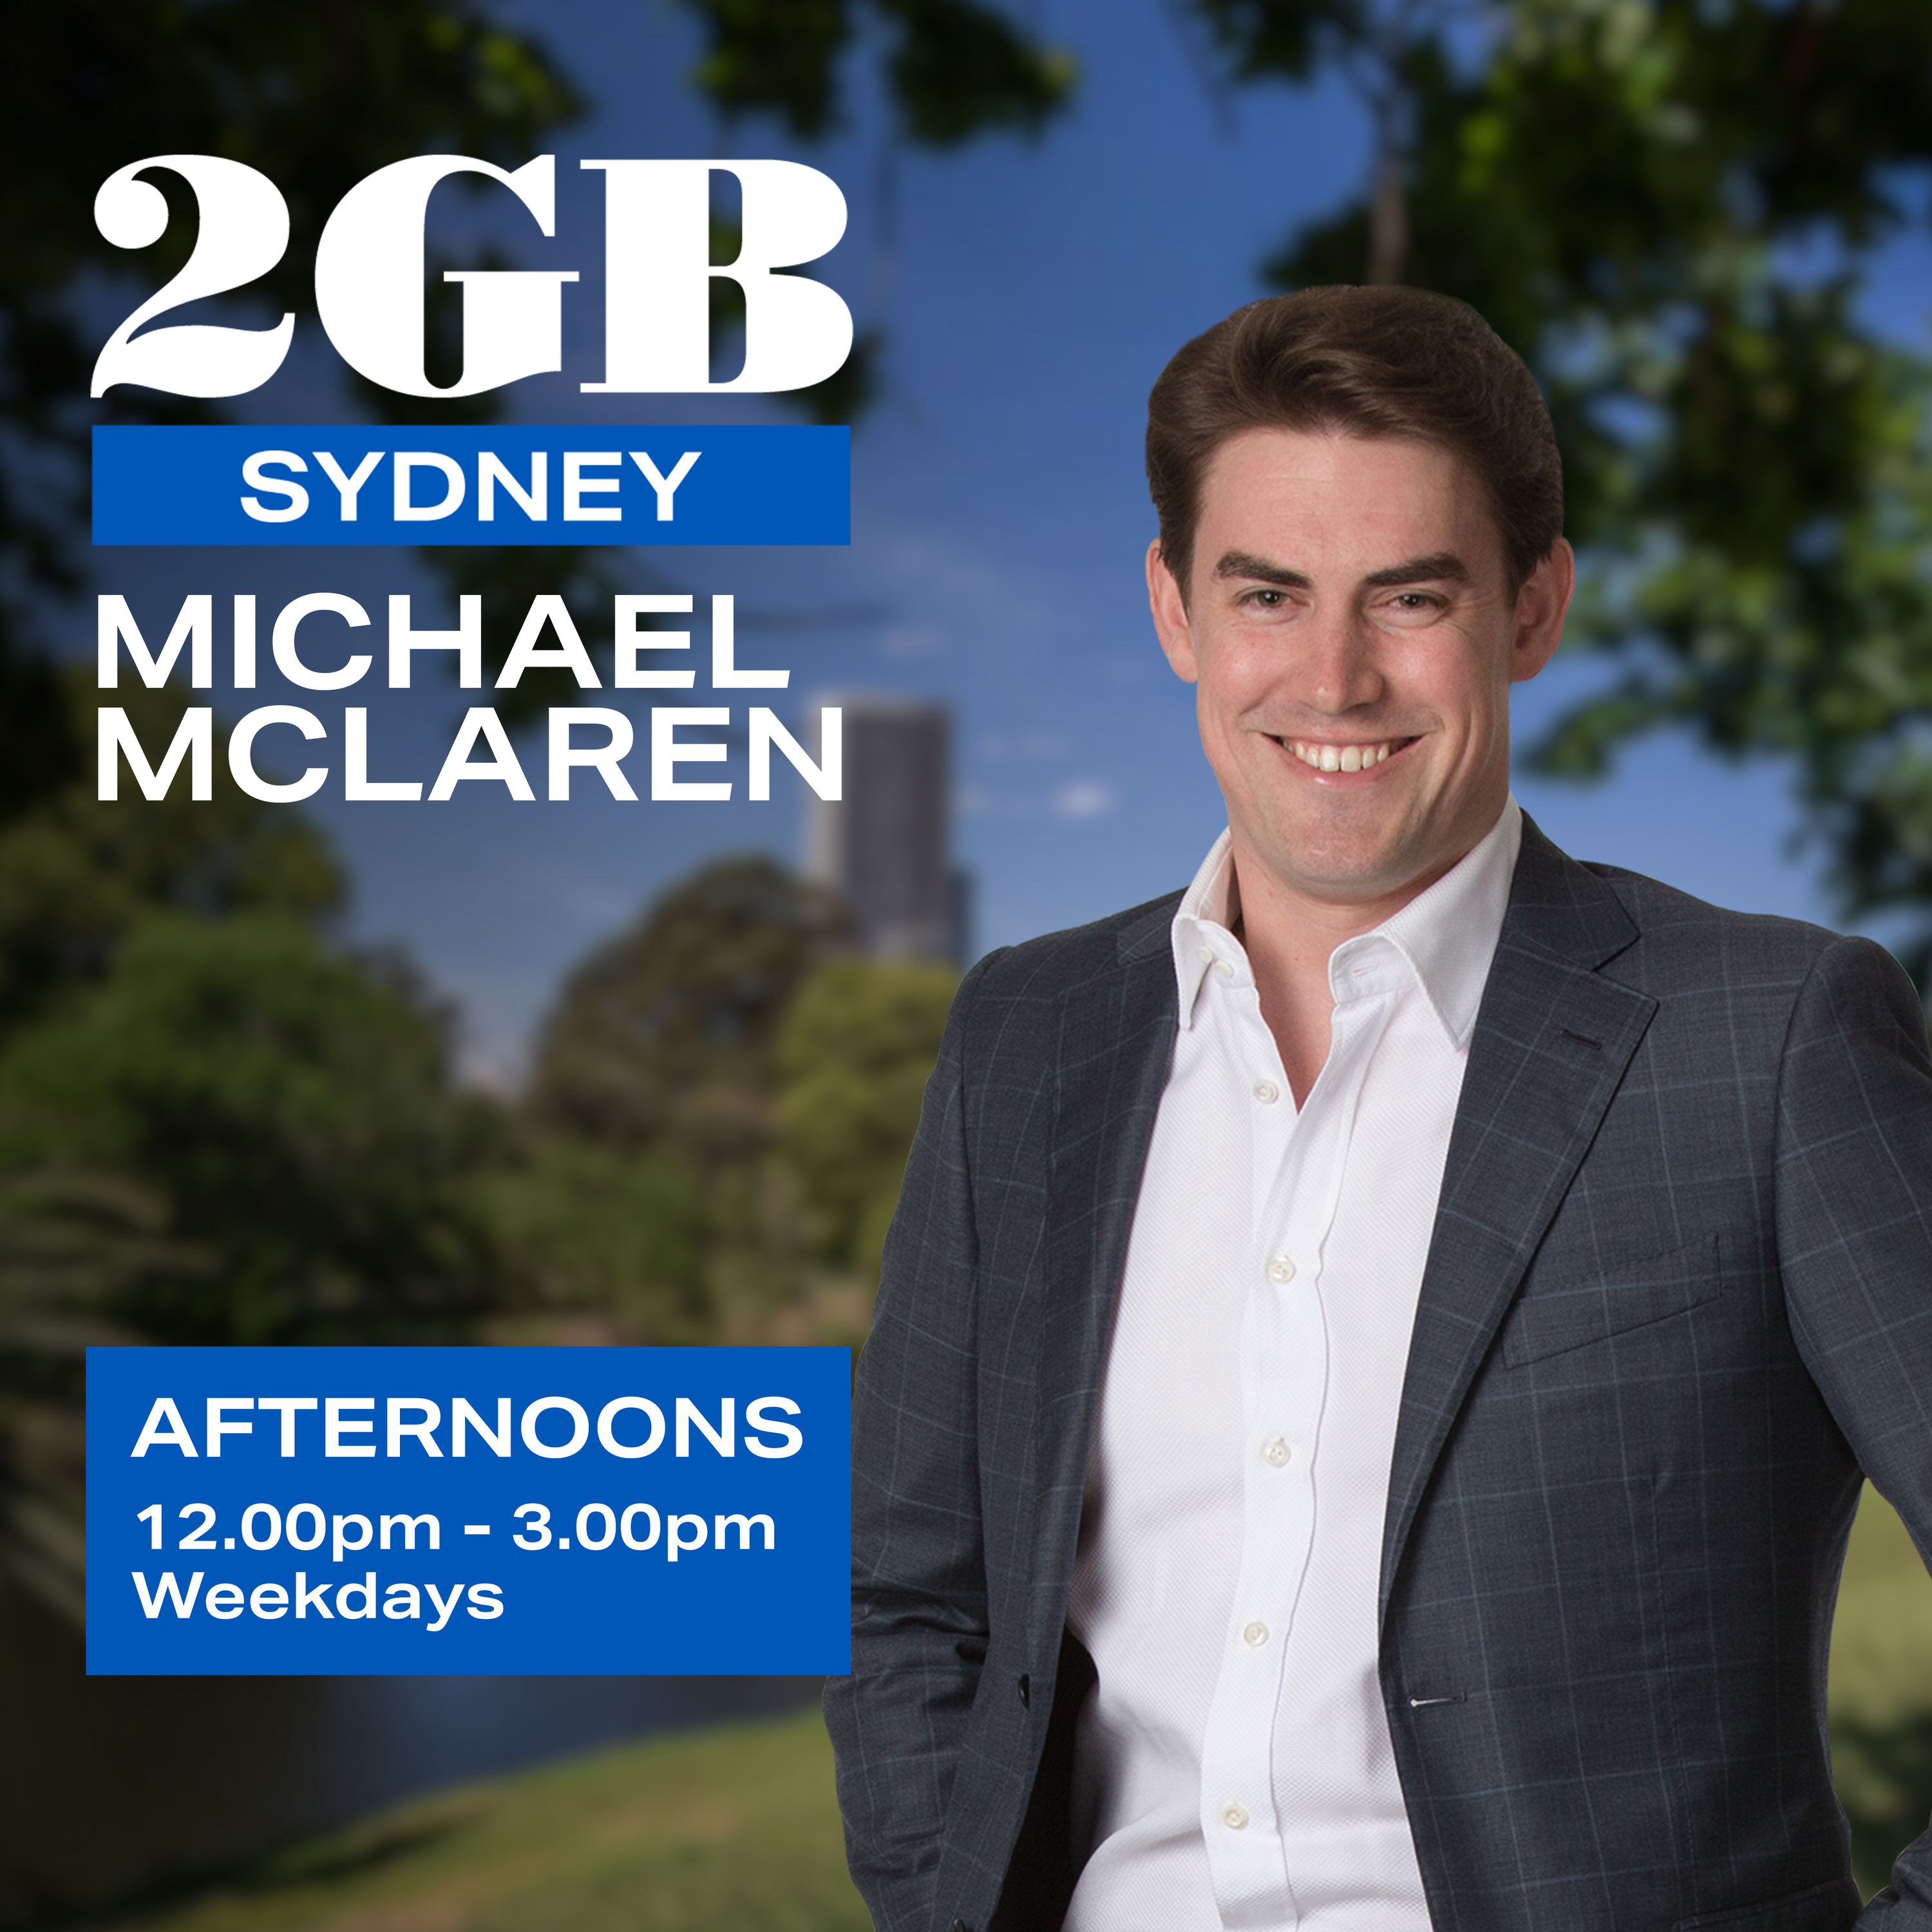 Afternoons with Michael McLaren - Thursday, 22nd February